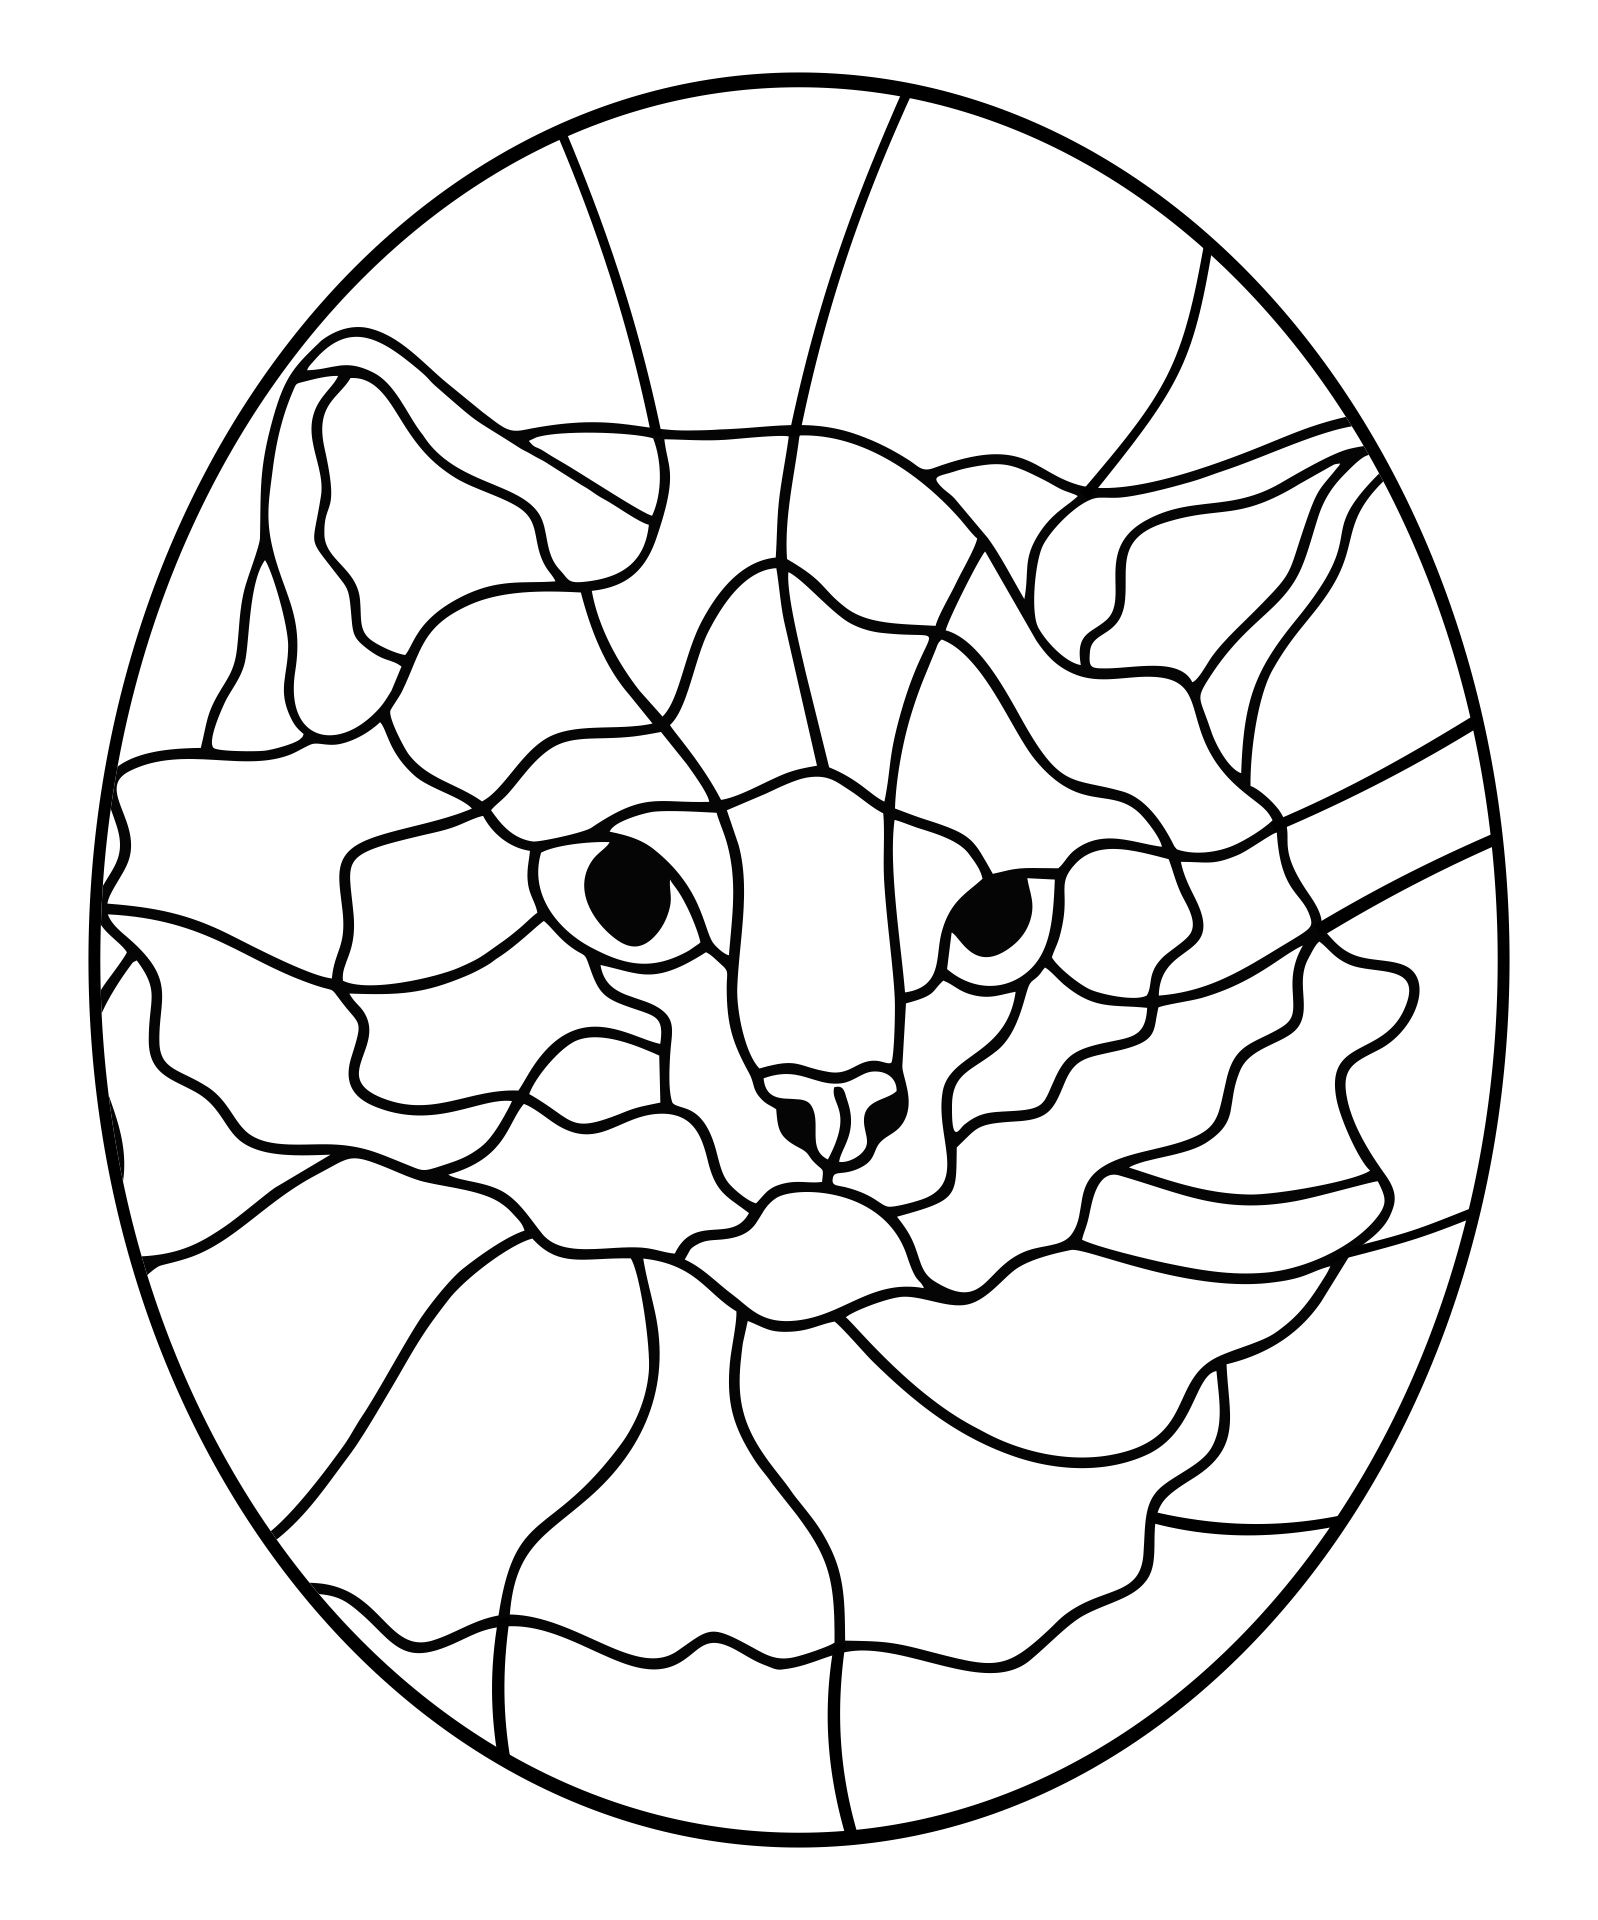 Printable Stained Glass Cat Patterns